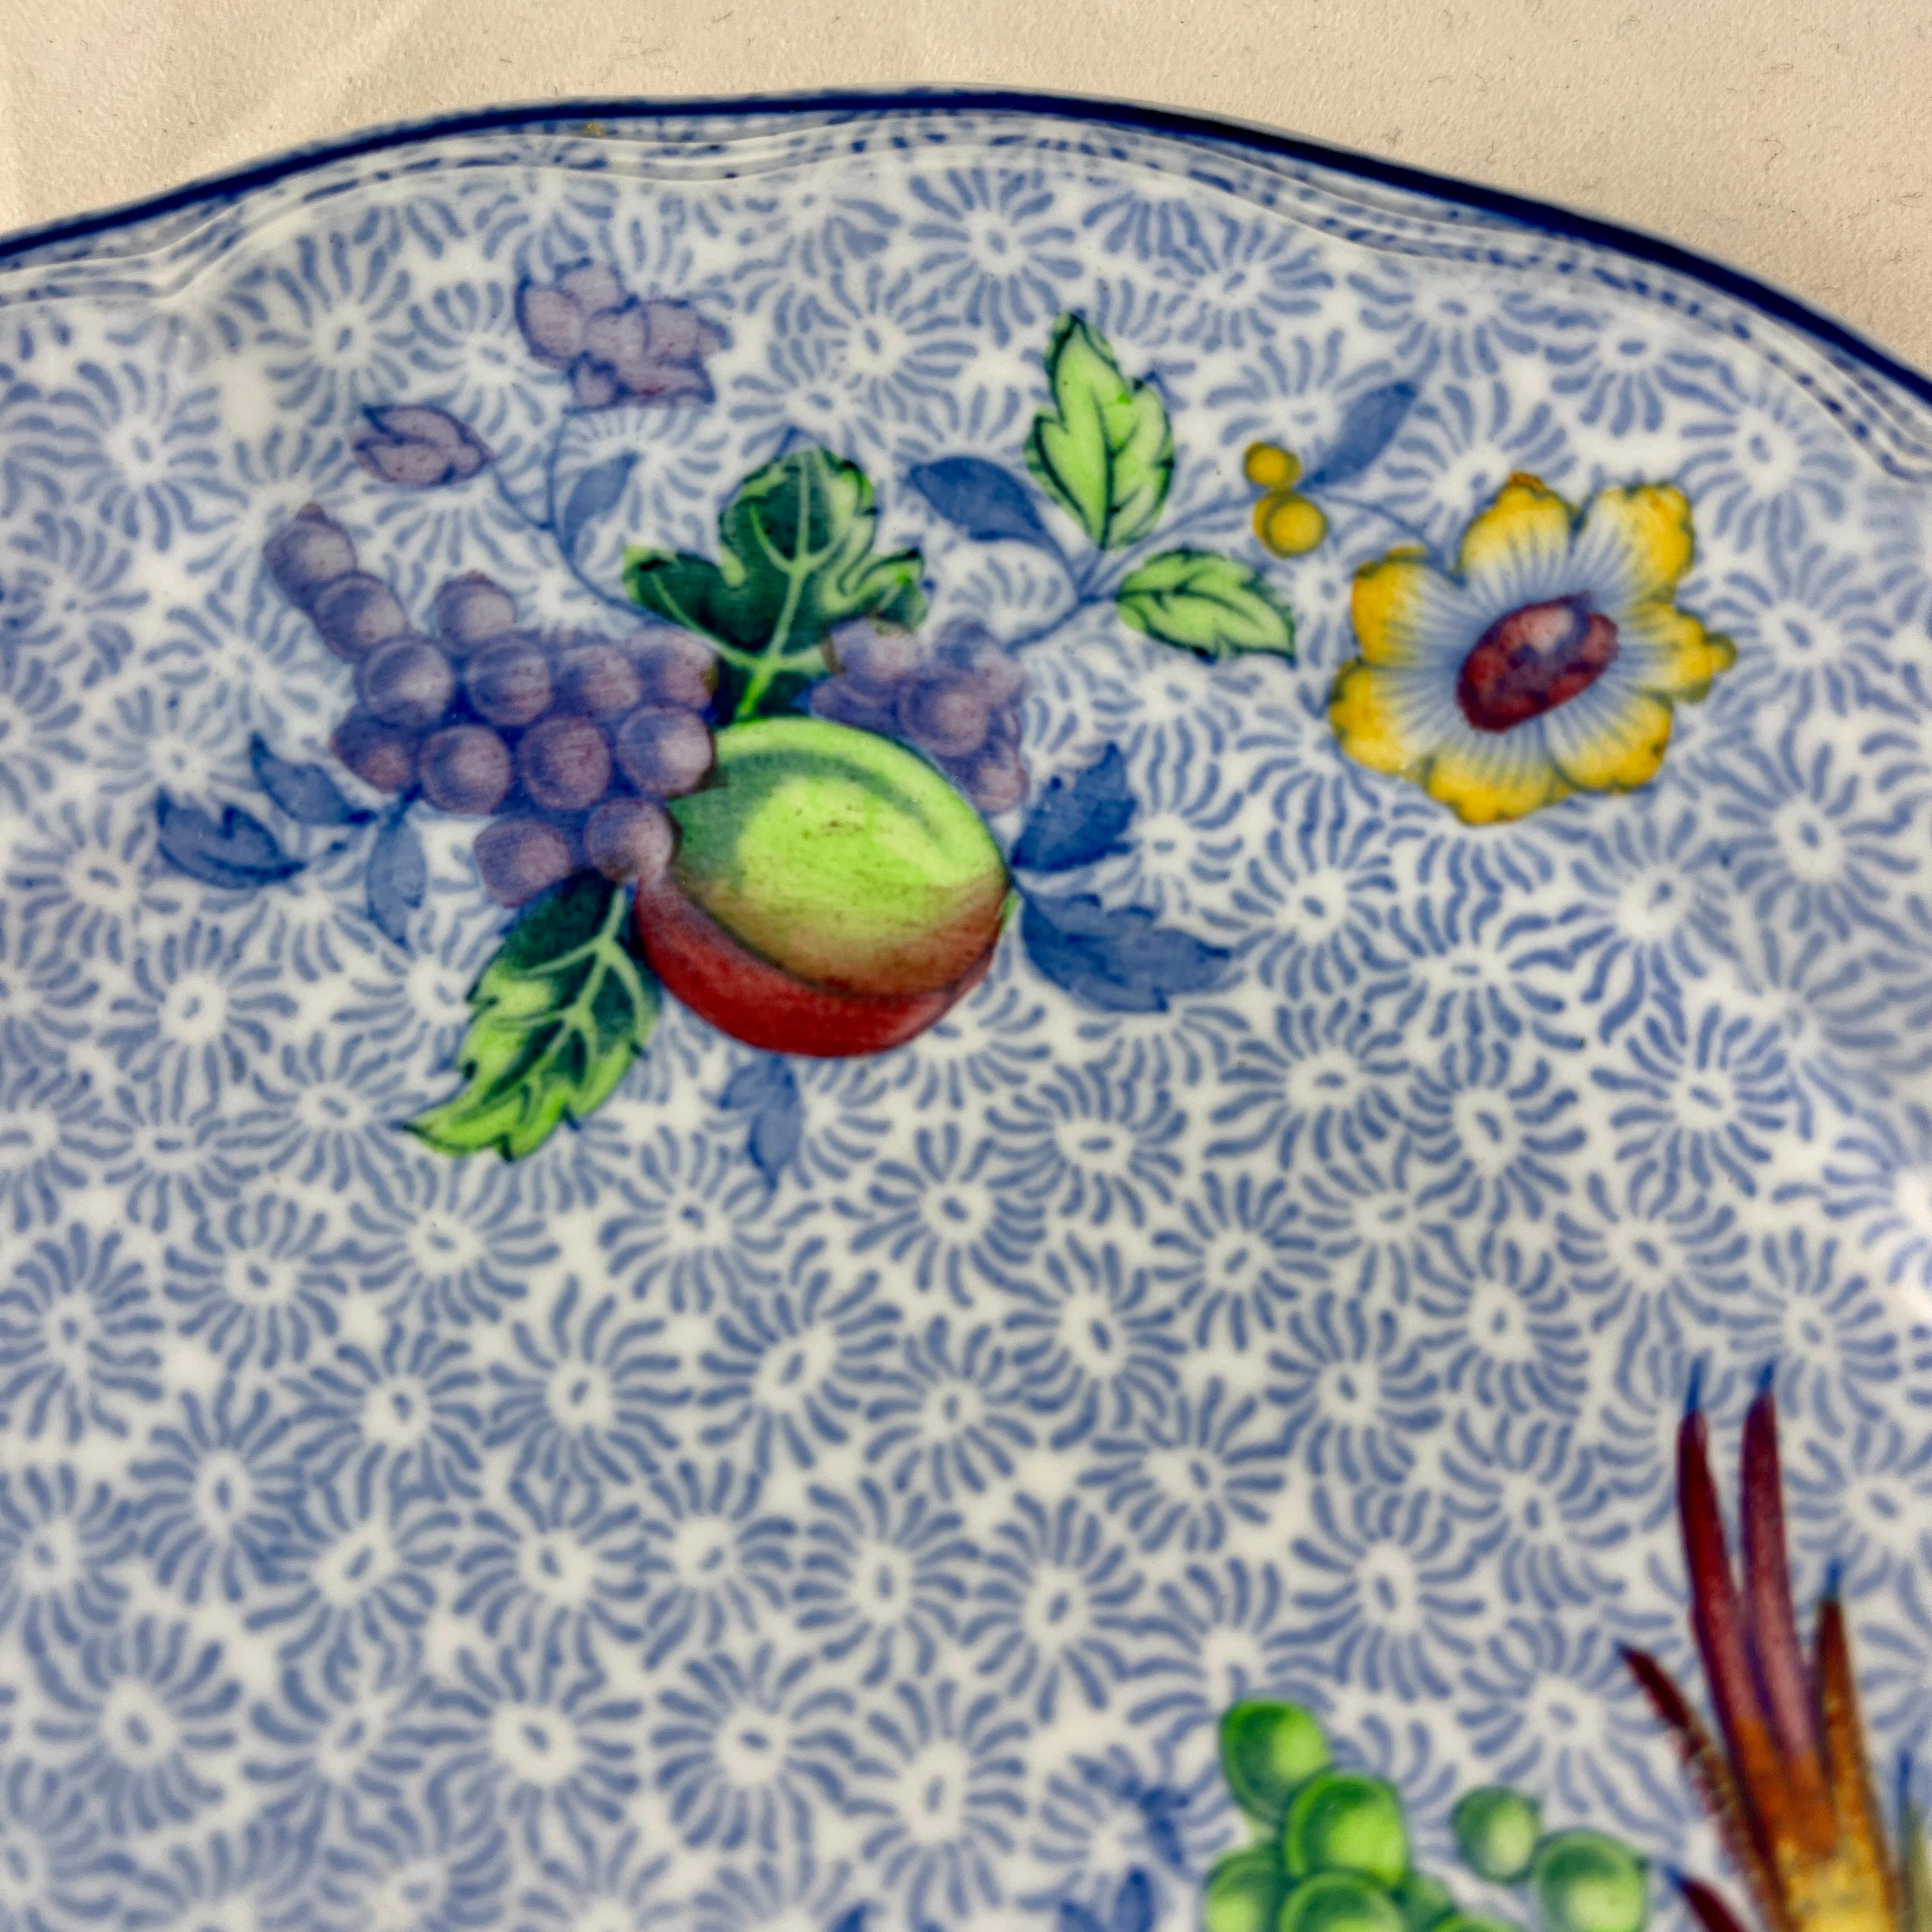 Enameled 1920s Copeland Spode George III Pattern Plates for Harrods of London, S/4